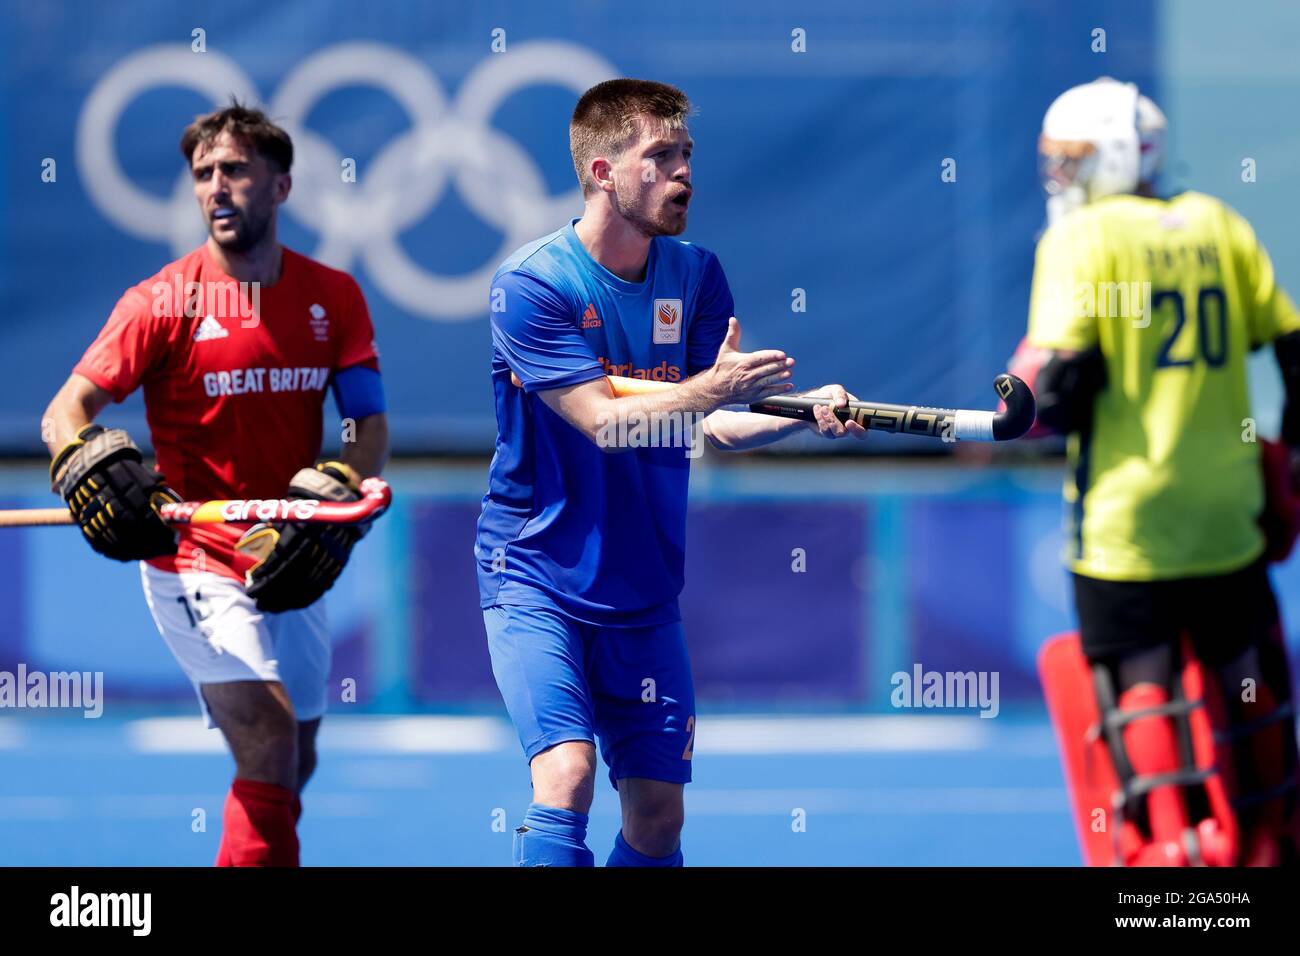 TOKYO, JAPAN - JULY 29: Thierry Brinkman of the Netherlands during the Tokyo 2020 Olympic Mens Hockey Tournament match between Netherlands and Great Britain at Oi Hockey Stadium on July 29, 2021 in Tokyo, Japan (Photo by Pim Waslander/Orange Pictures) NOCNSF Credit: Orange Pics BV/Alamy Live News Stock Photo